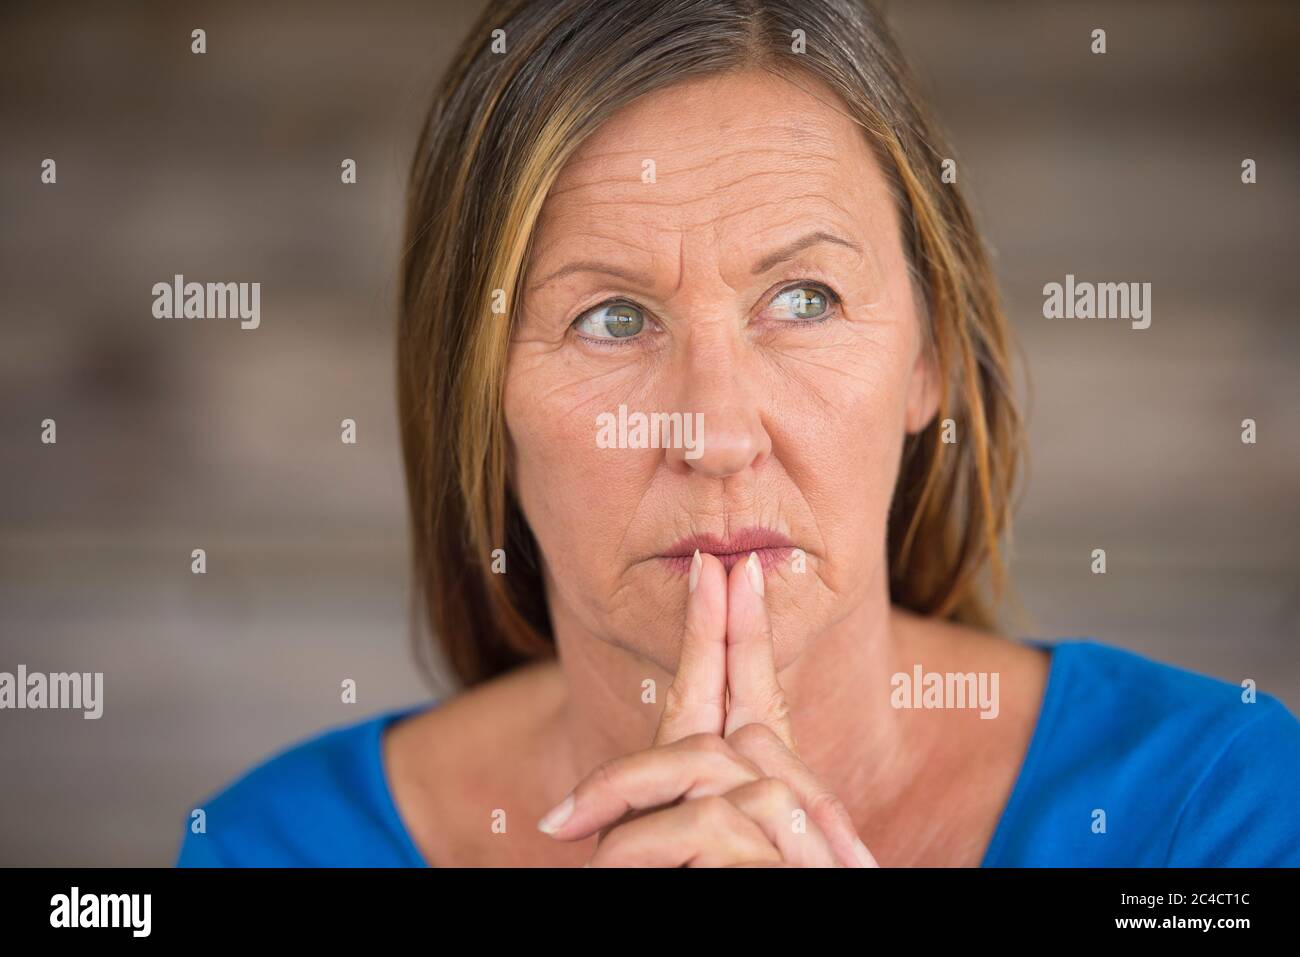 Portrtait attractive religious christian mature woman praying with folded hands, thoughtful, hopeful, meditating, blurred background, copy space. Stock Photo